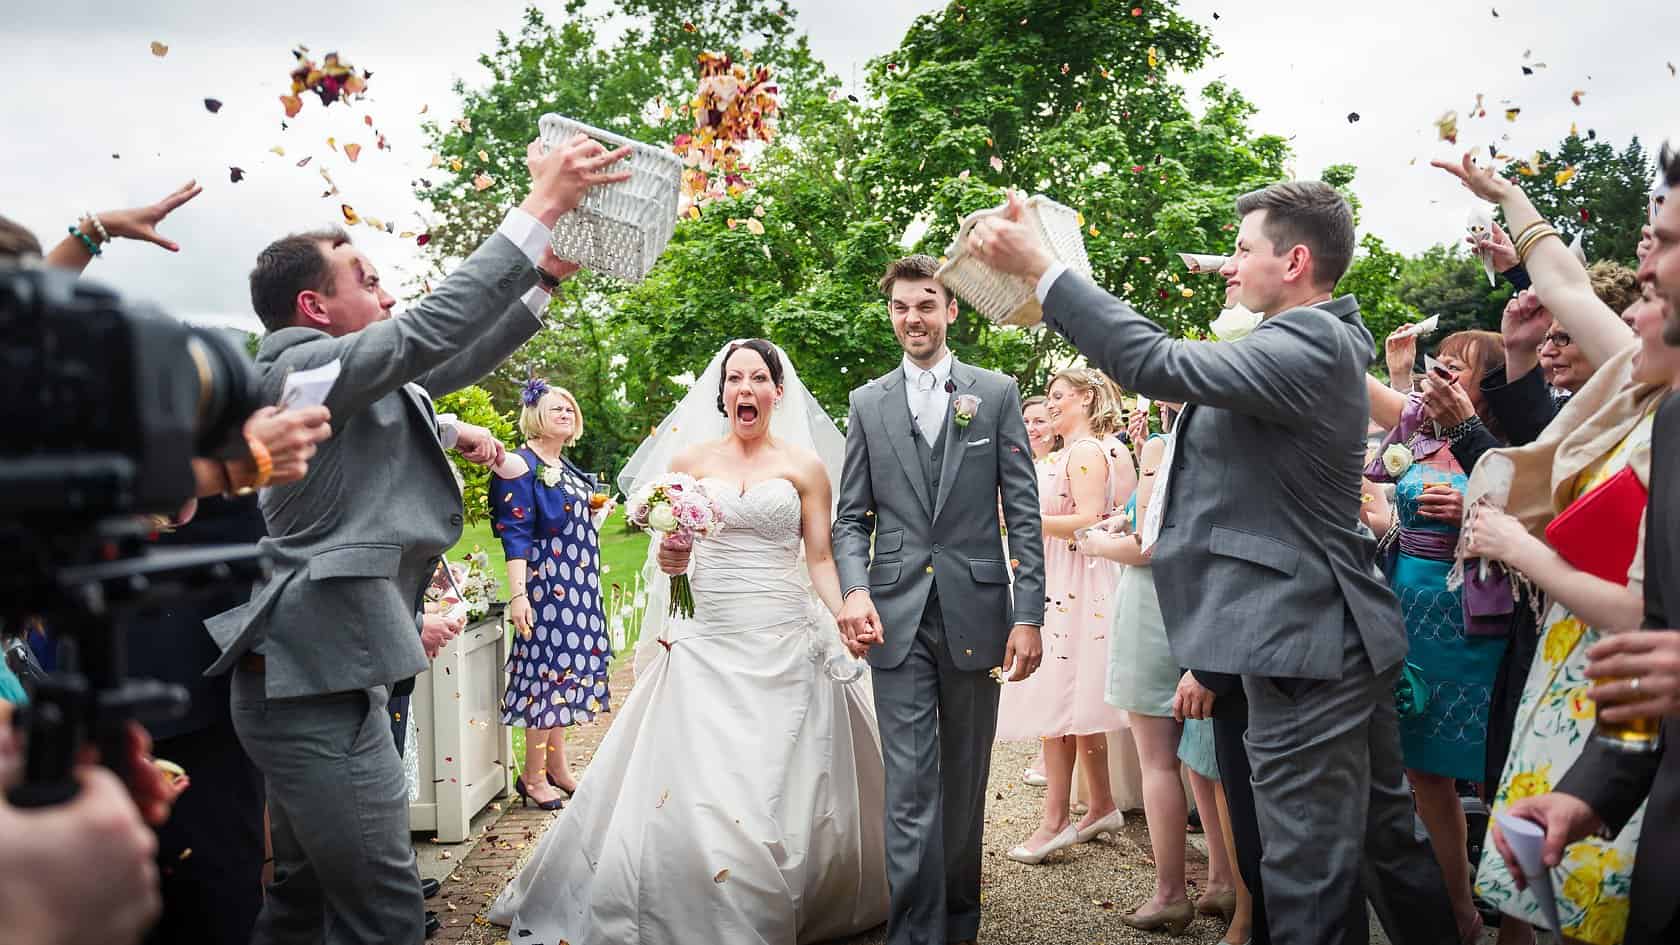 Documentary-Wedding-Photography-Justin-Bailey-Confetti-With-Funny-Faces